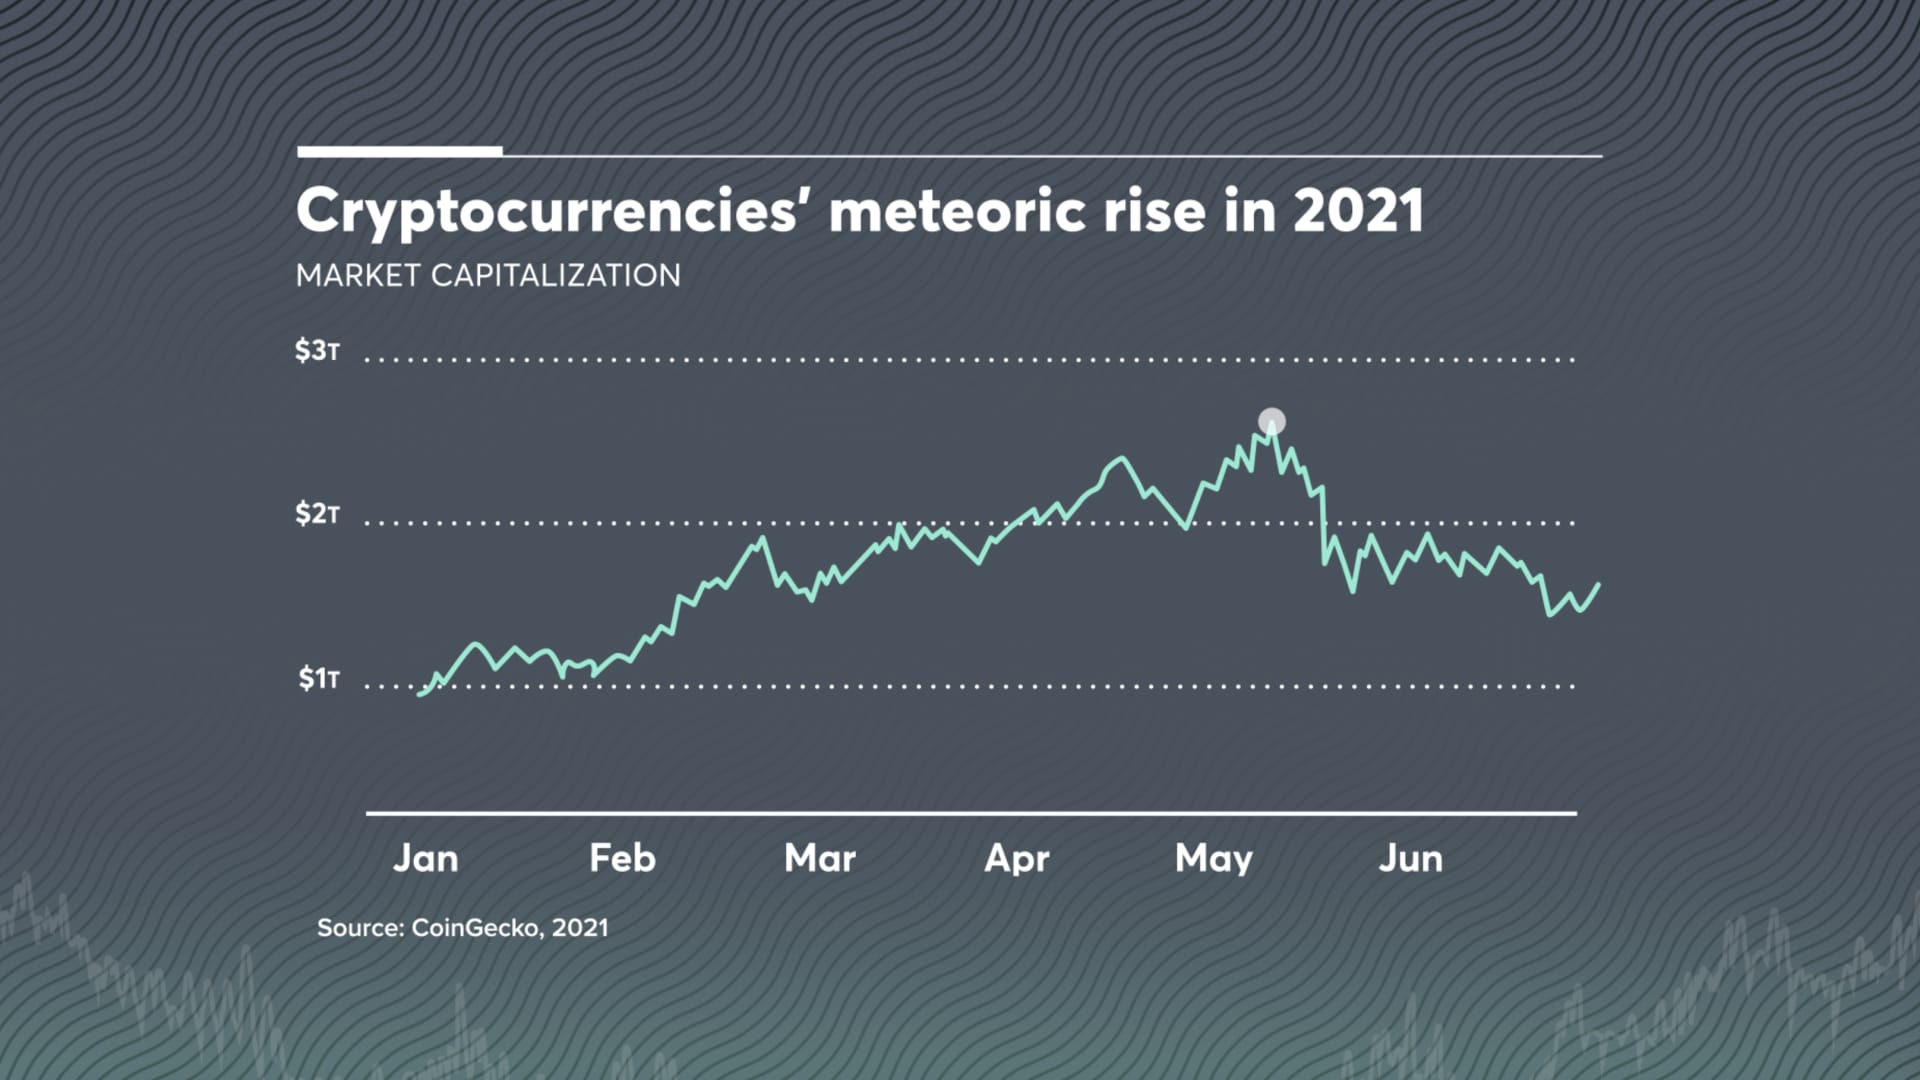 Cryptocurrencies have grown rapidly in 2021 to hit a tota; market capitalization of more than $2.5 trillion in May.